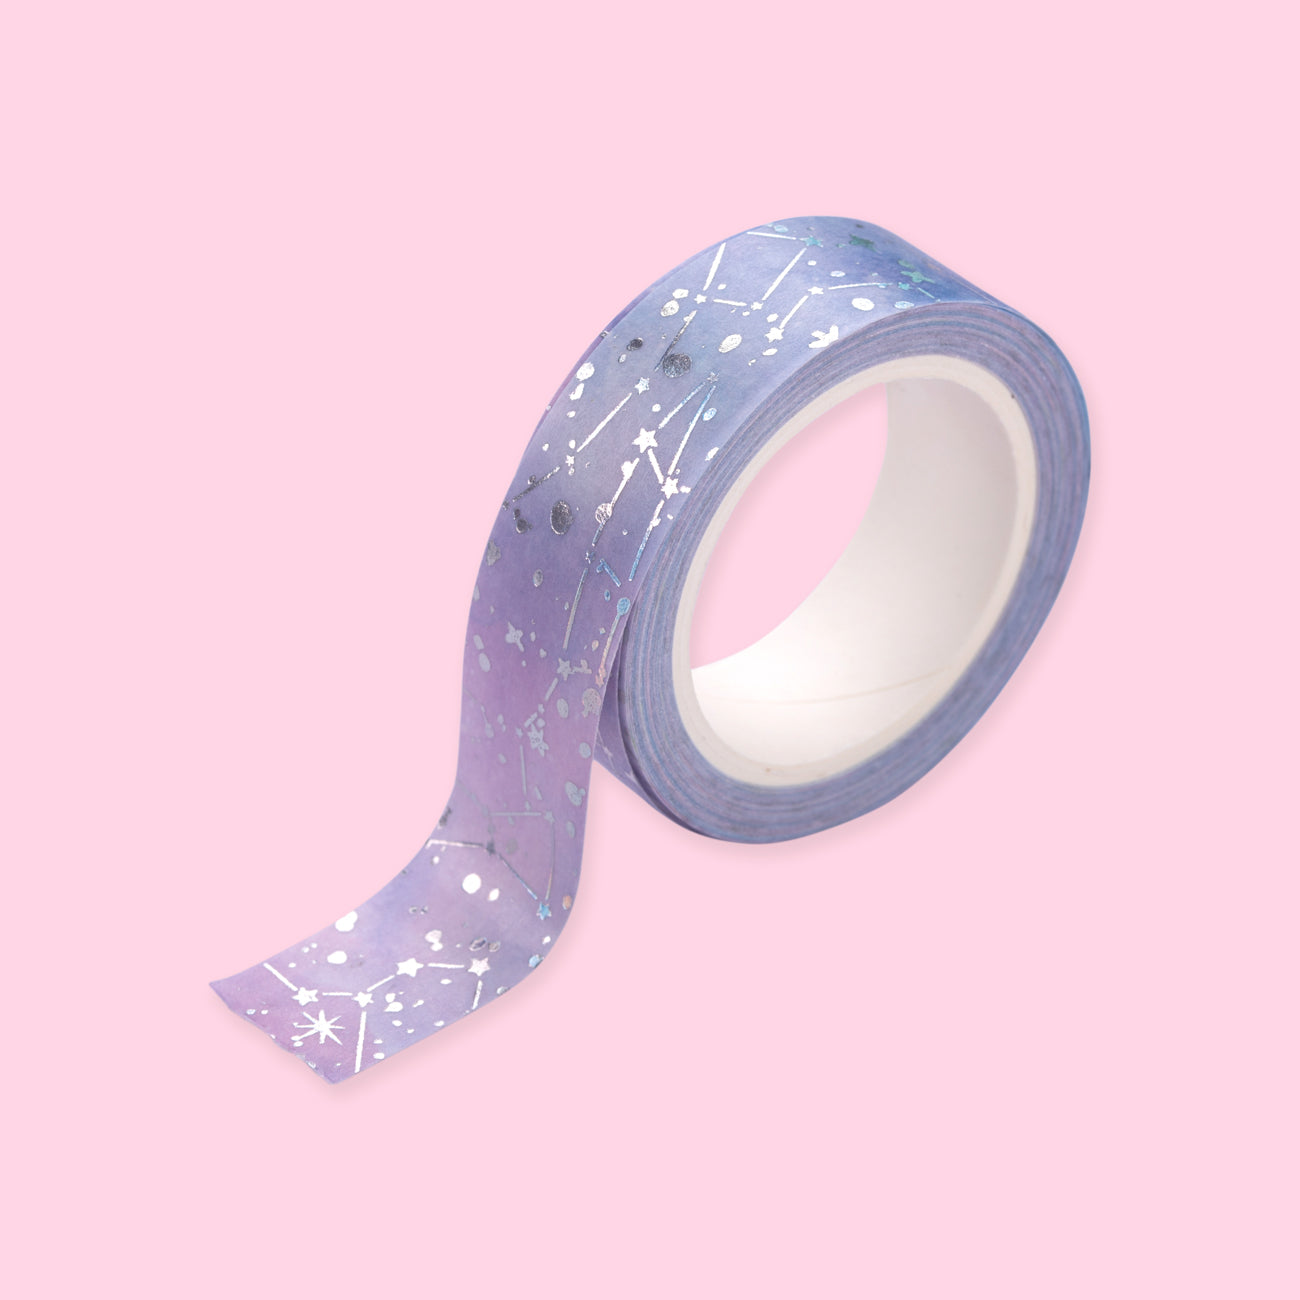 Silver Foil Washi Tape - Constellation